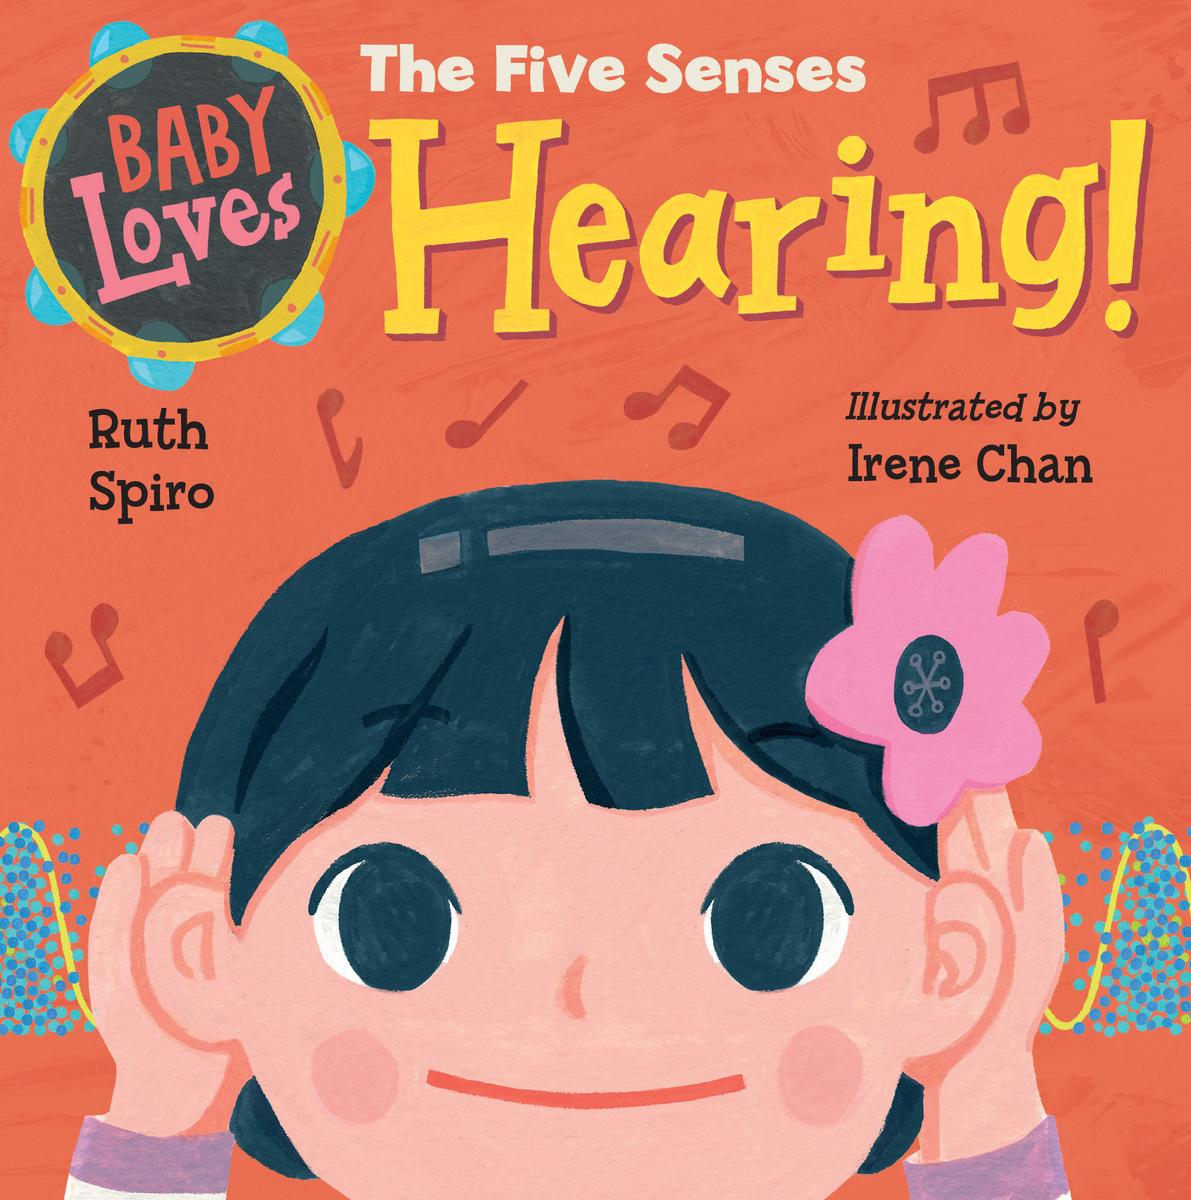 Baby Loves the Five Senses: Hearing! ( BABY LOVES SCIENCE series)